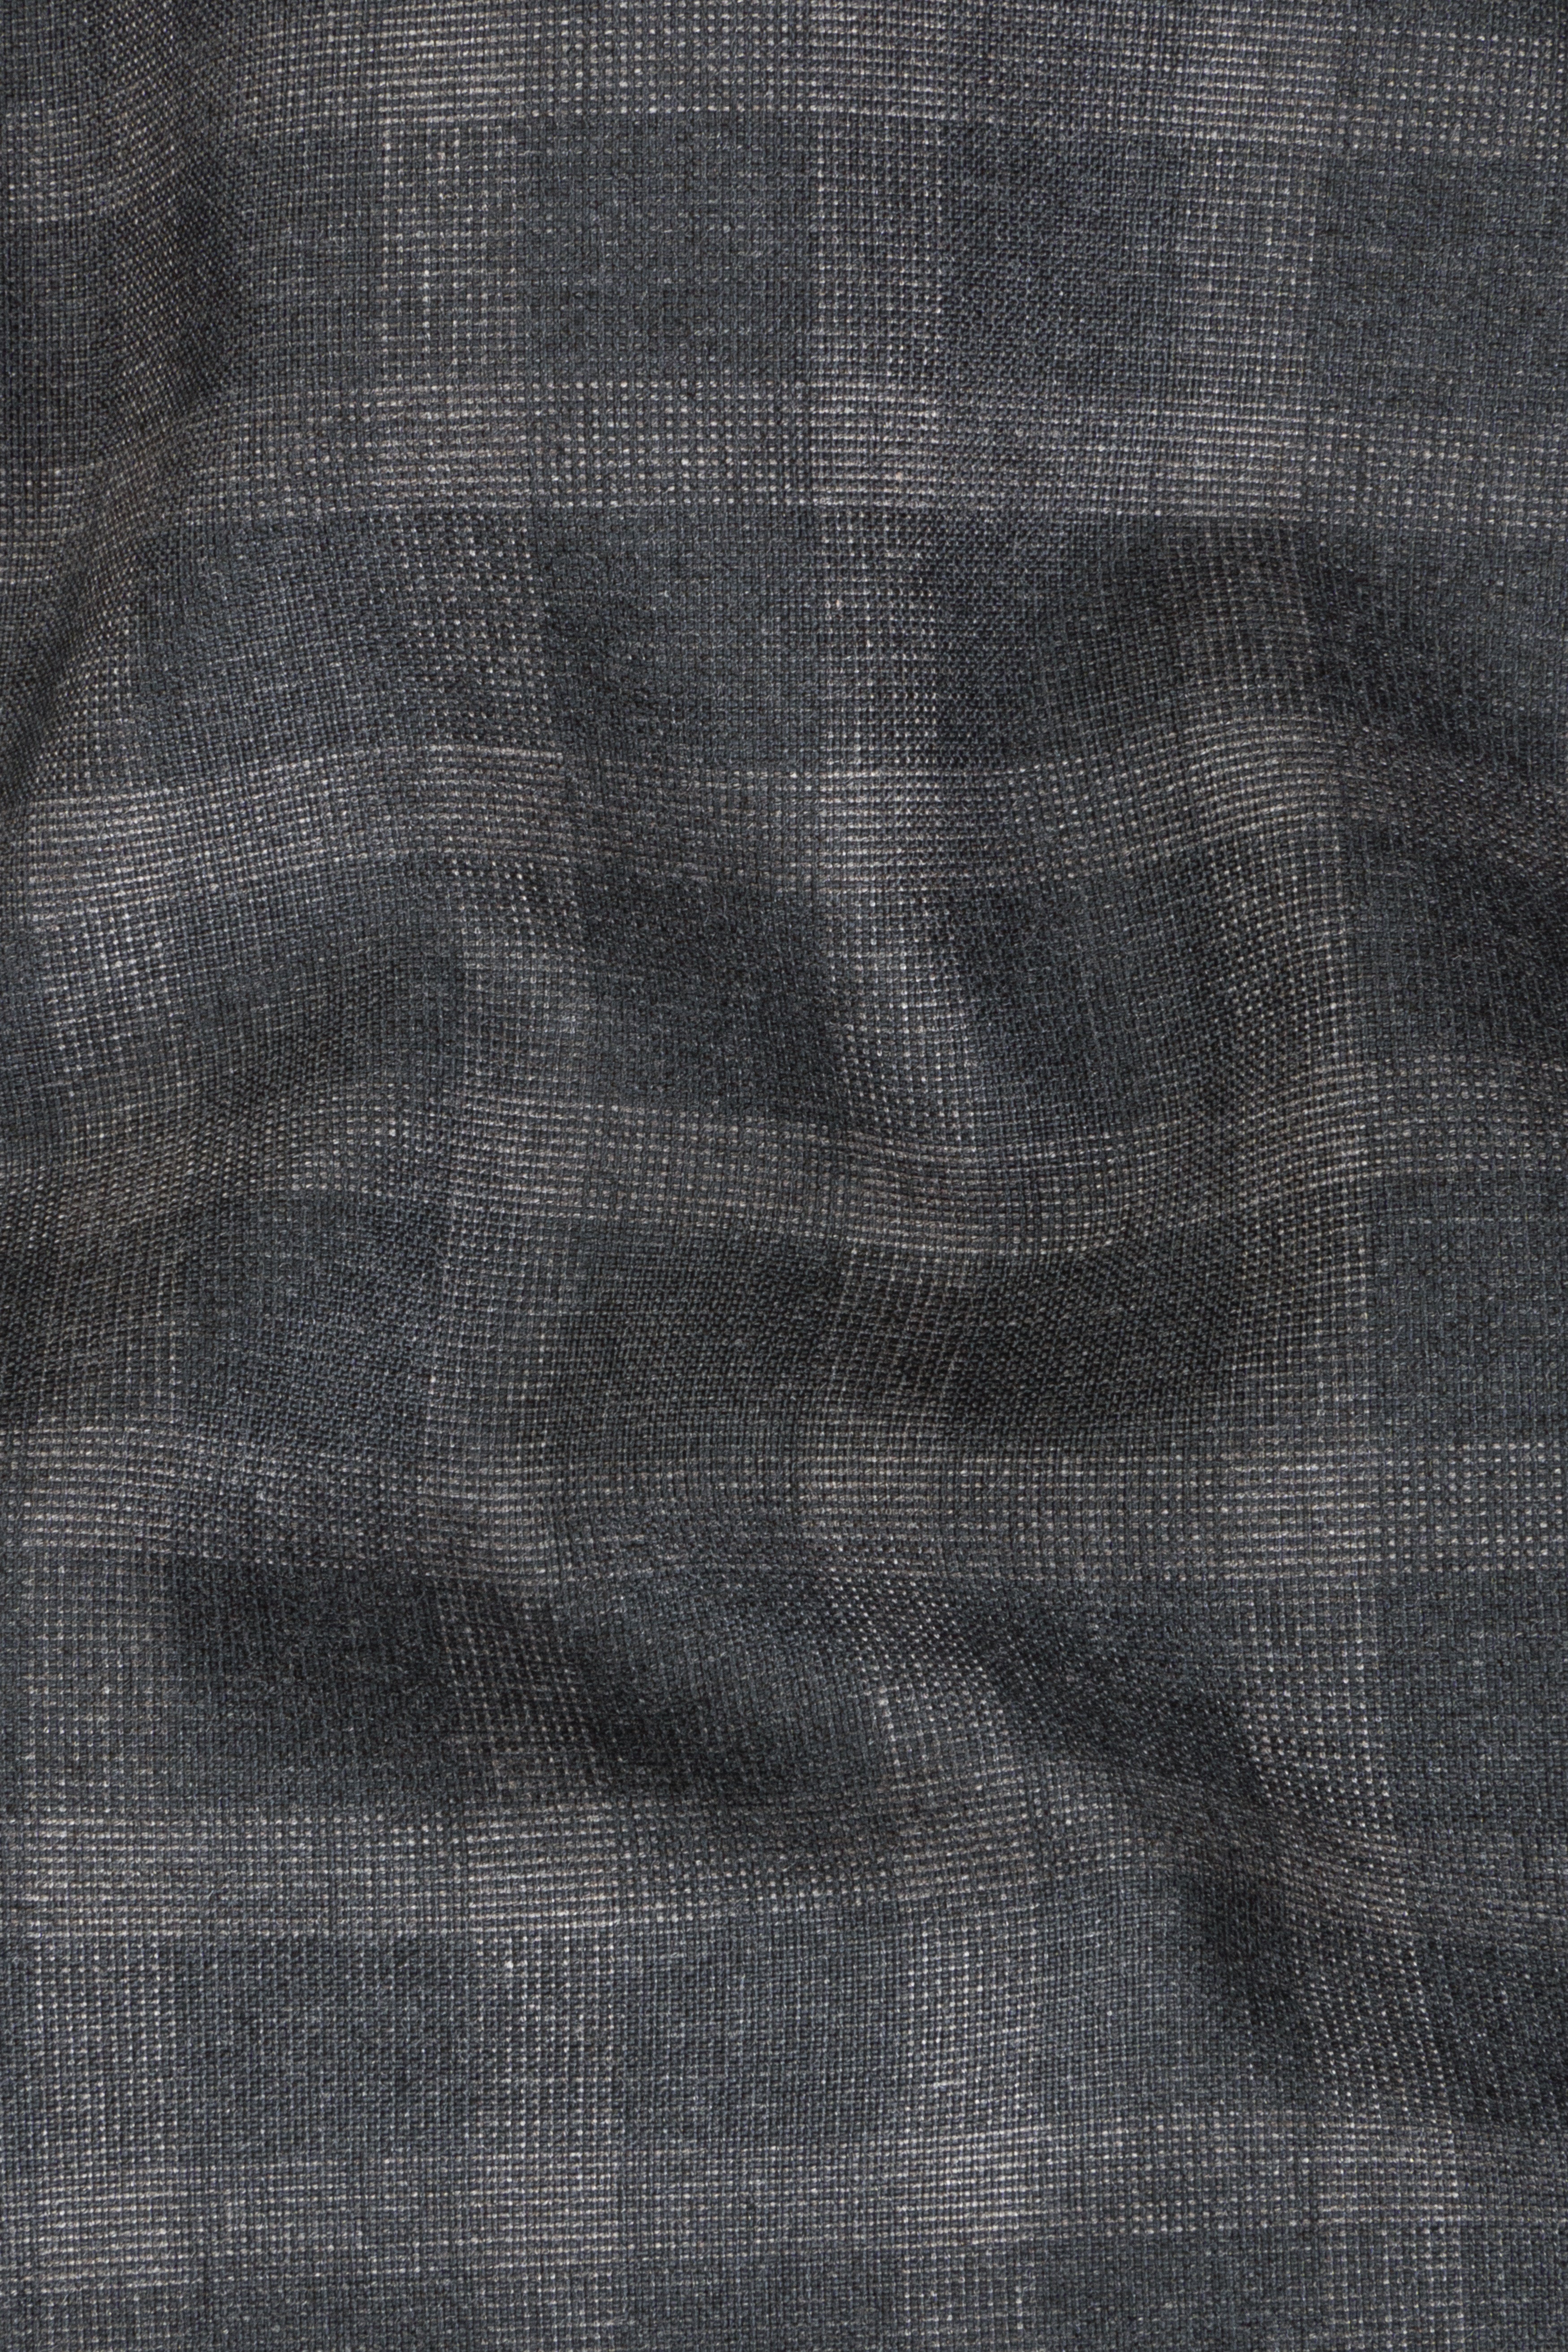 Gravel Gray Checkered Wool Blend Single Breasted Suit